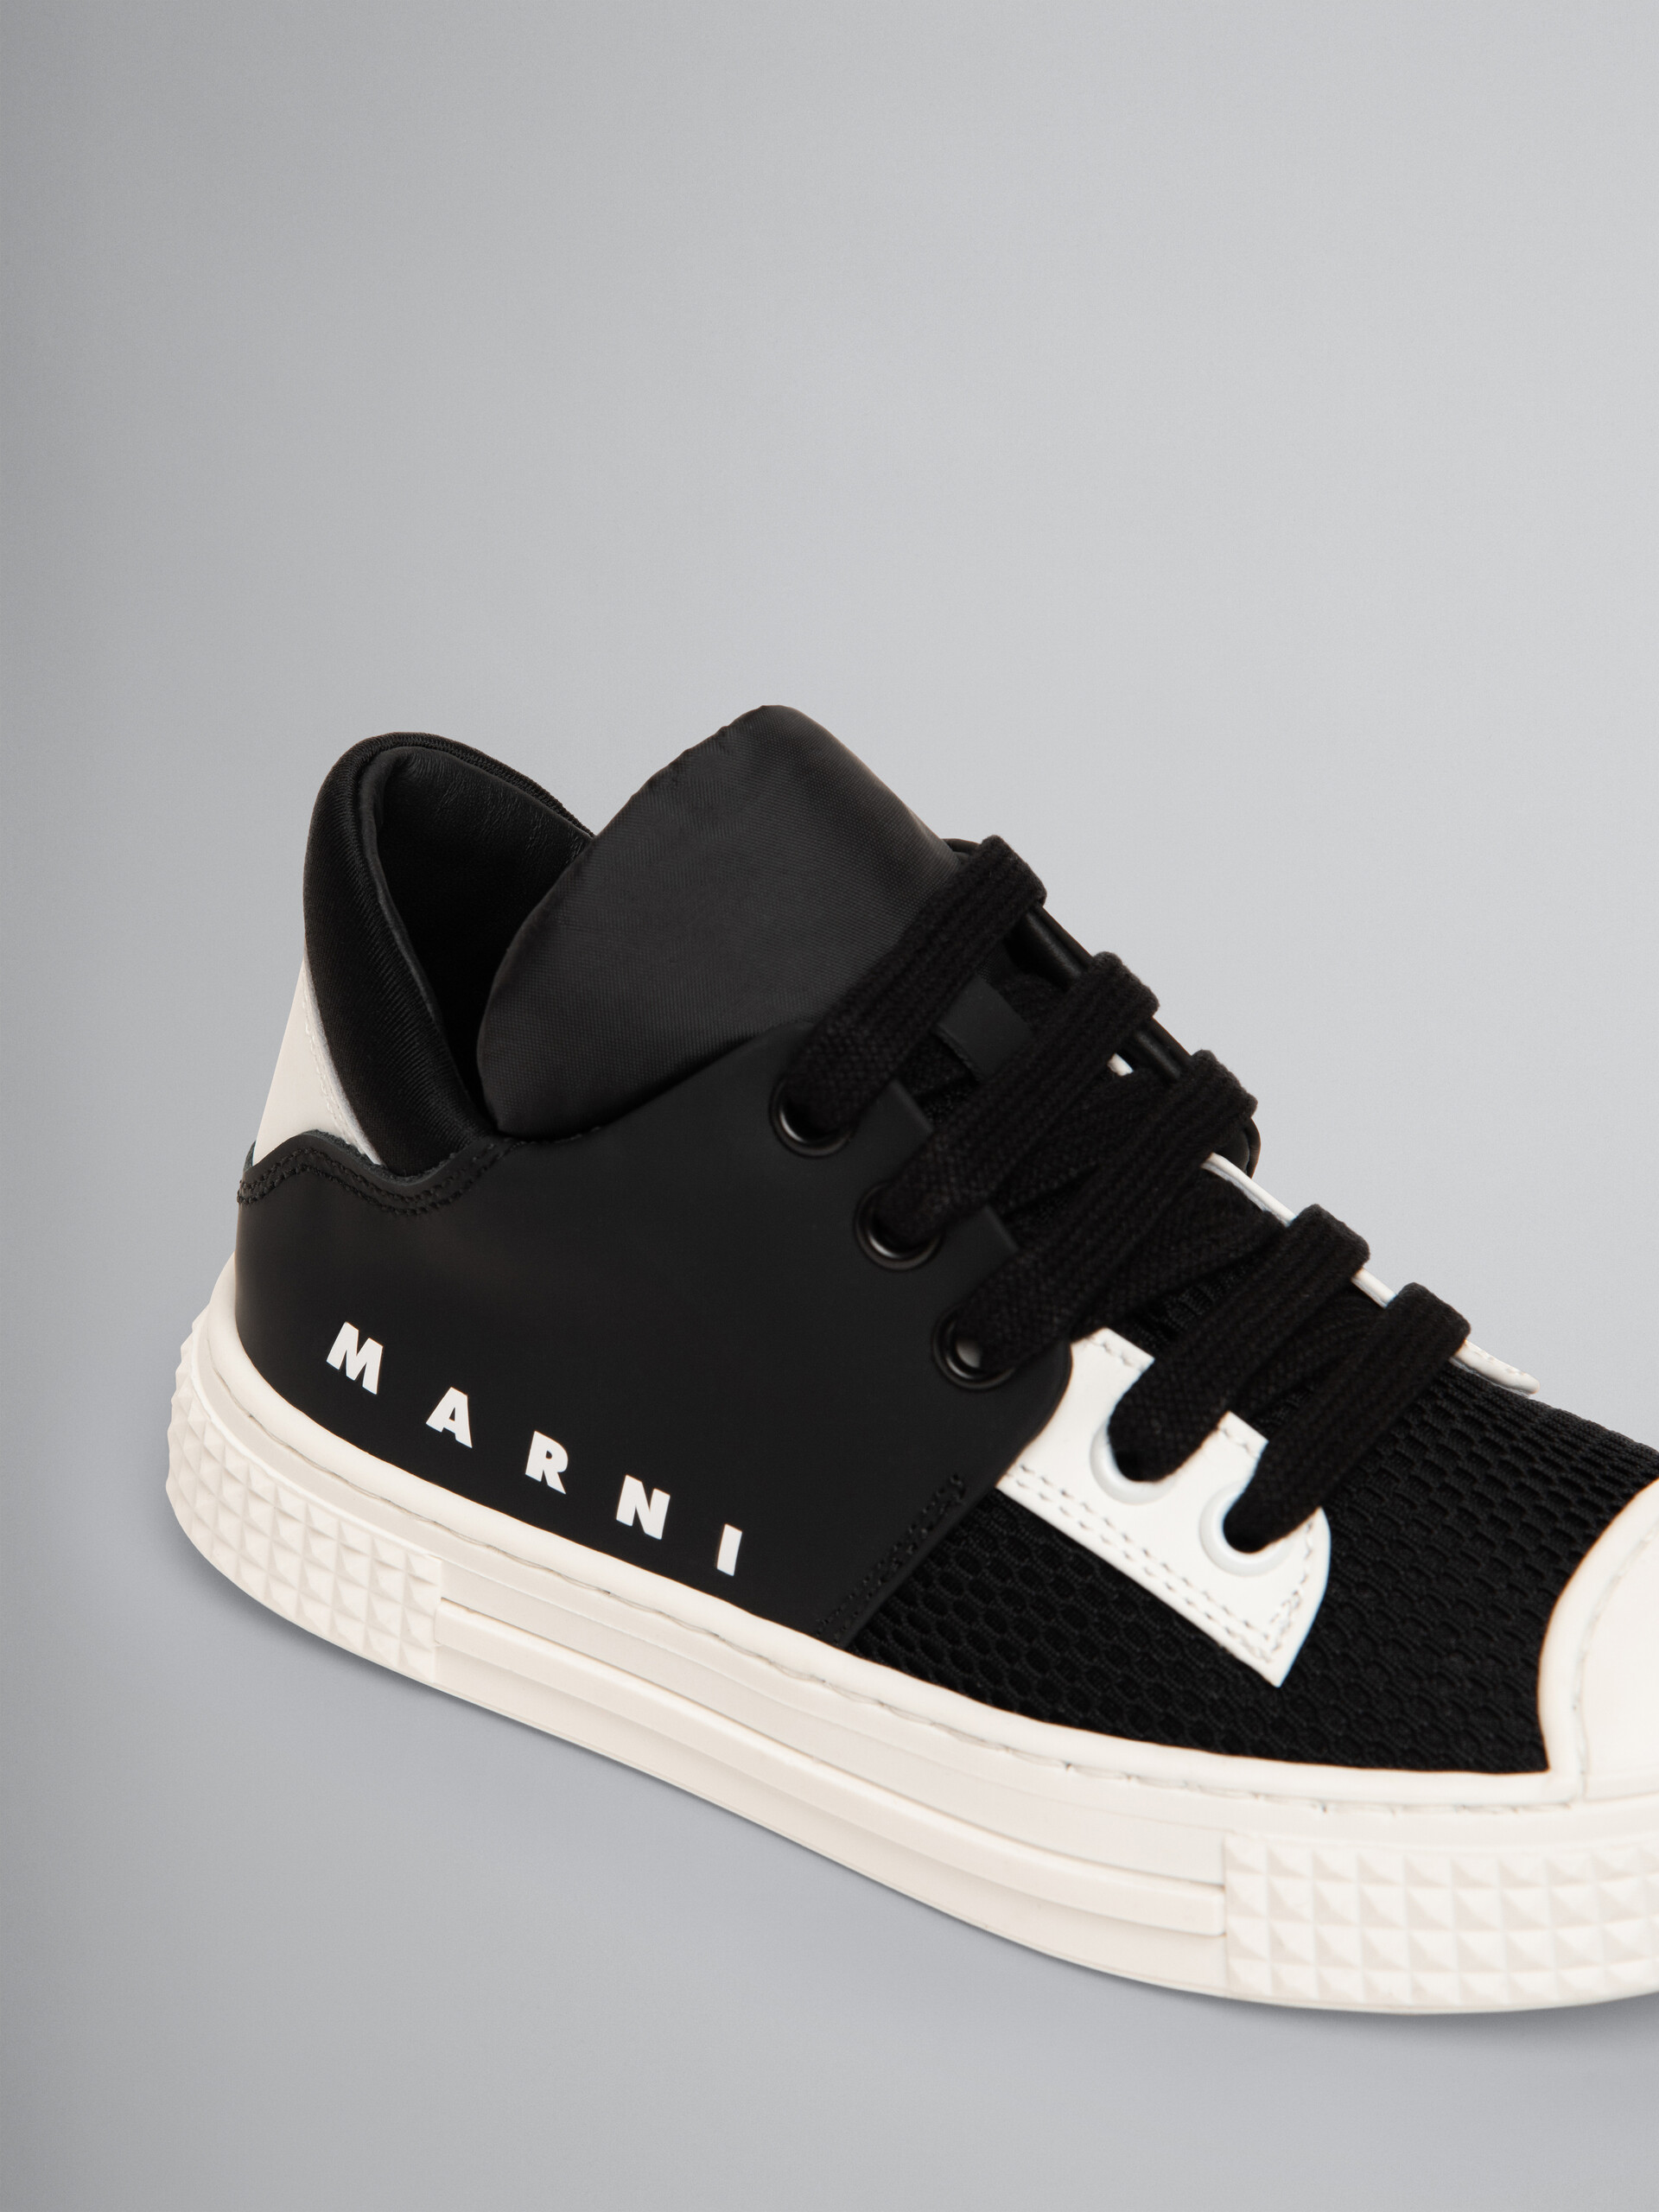 Black leather sneaker with Marni logo - Other accessories - Image 4